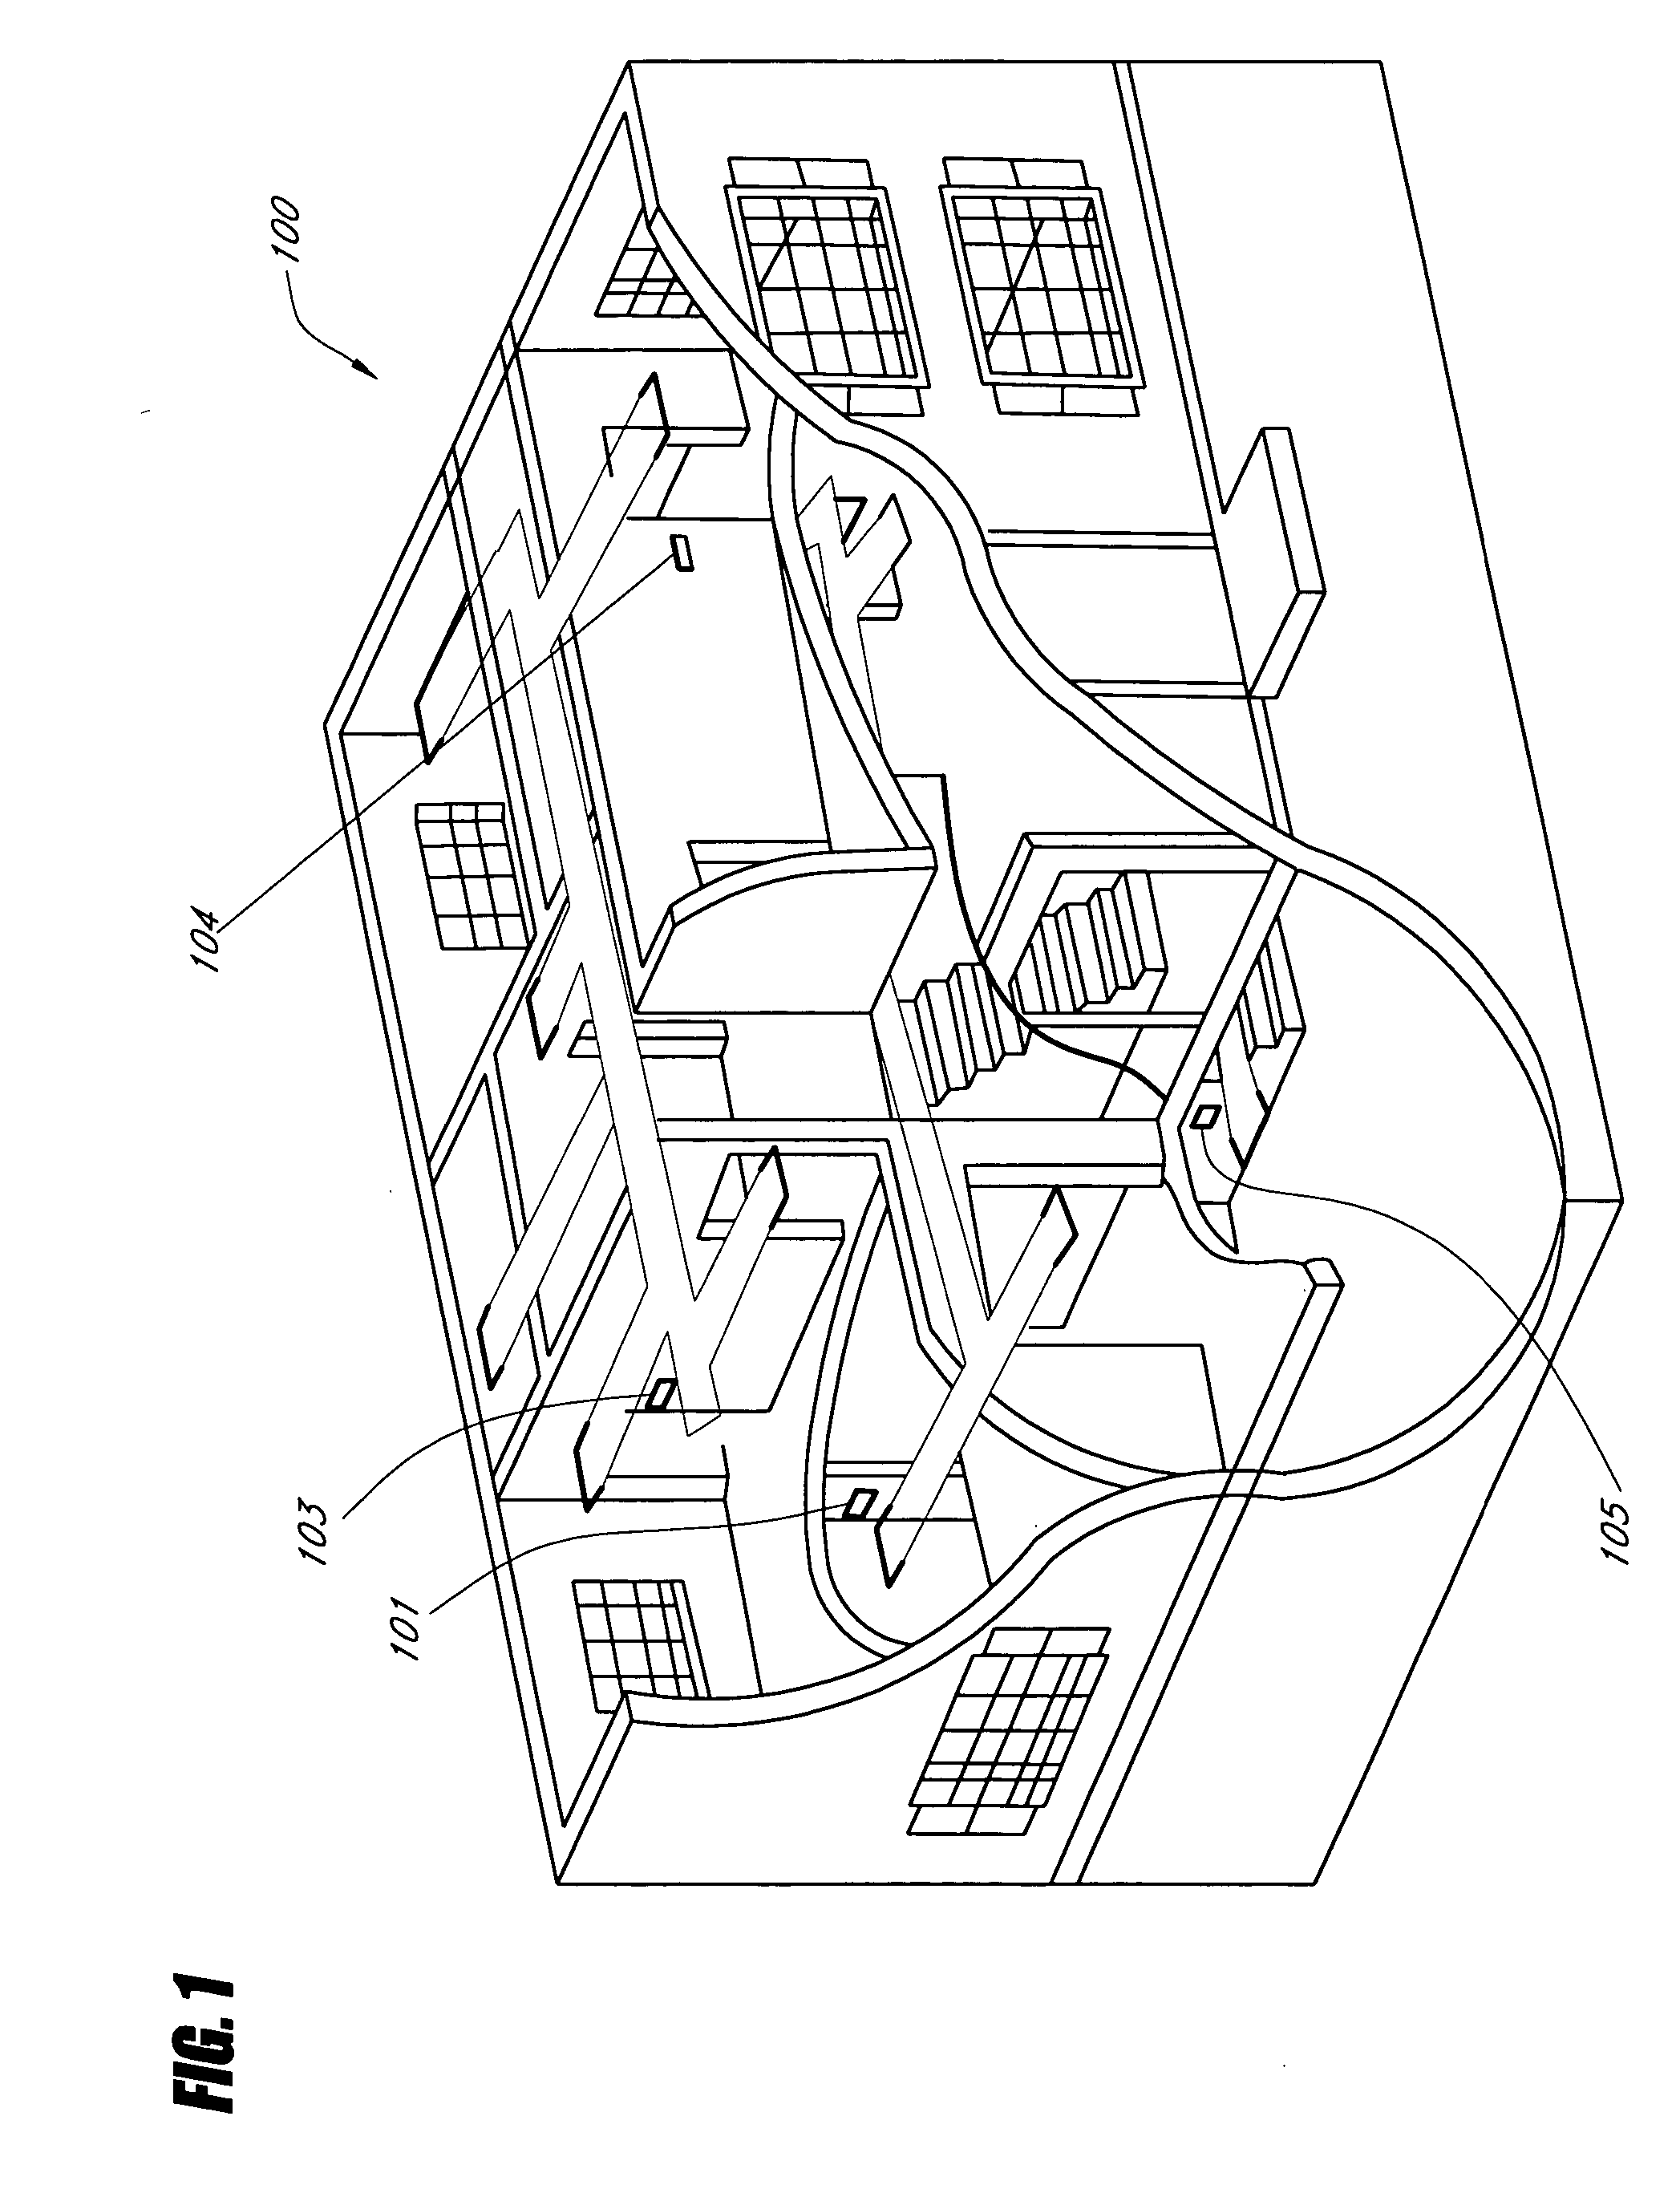 Electronically-controlled register vent for zone heating and cooling